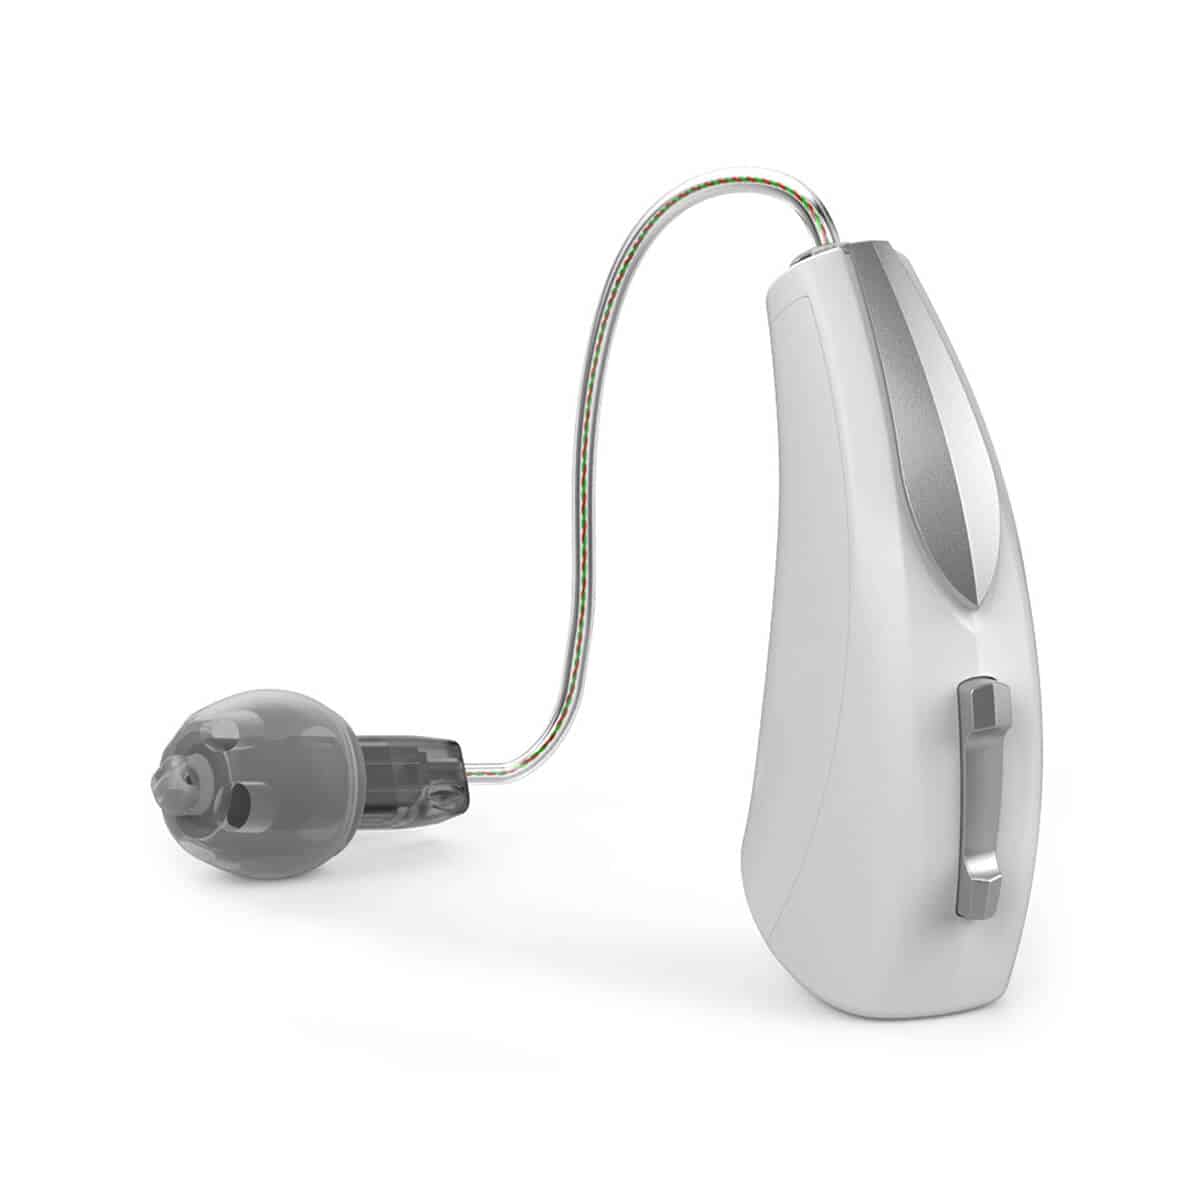 Starkey Hearing Aids Starkey Hearing Aid Prices The Hearing Experience